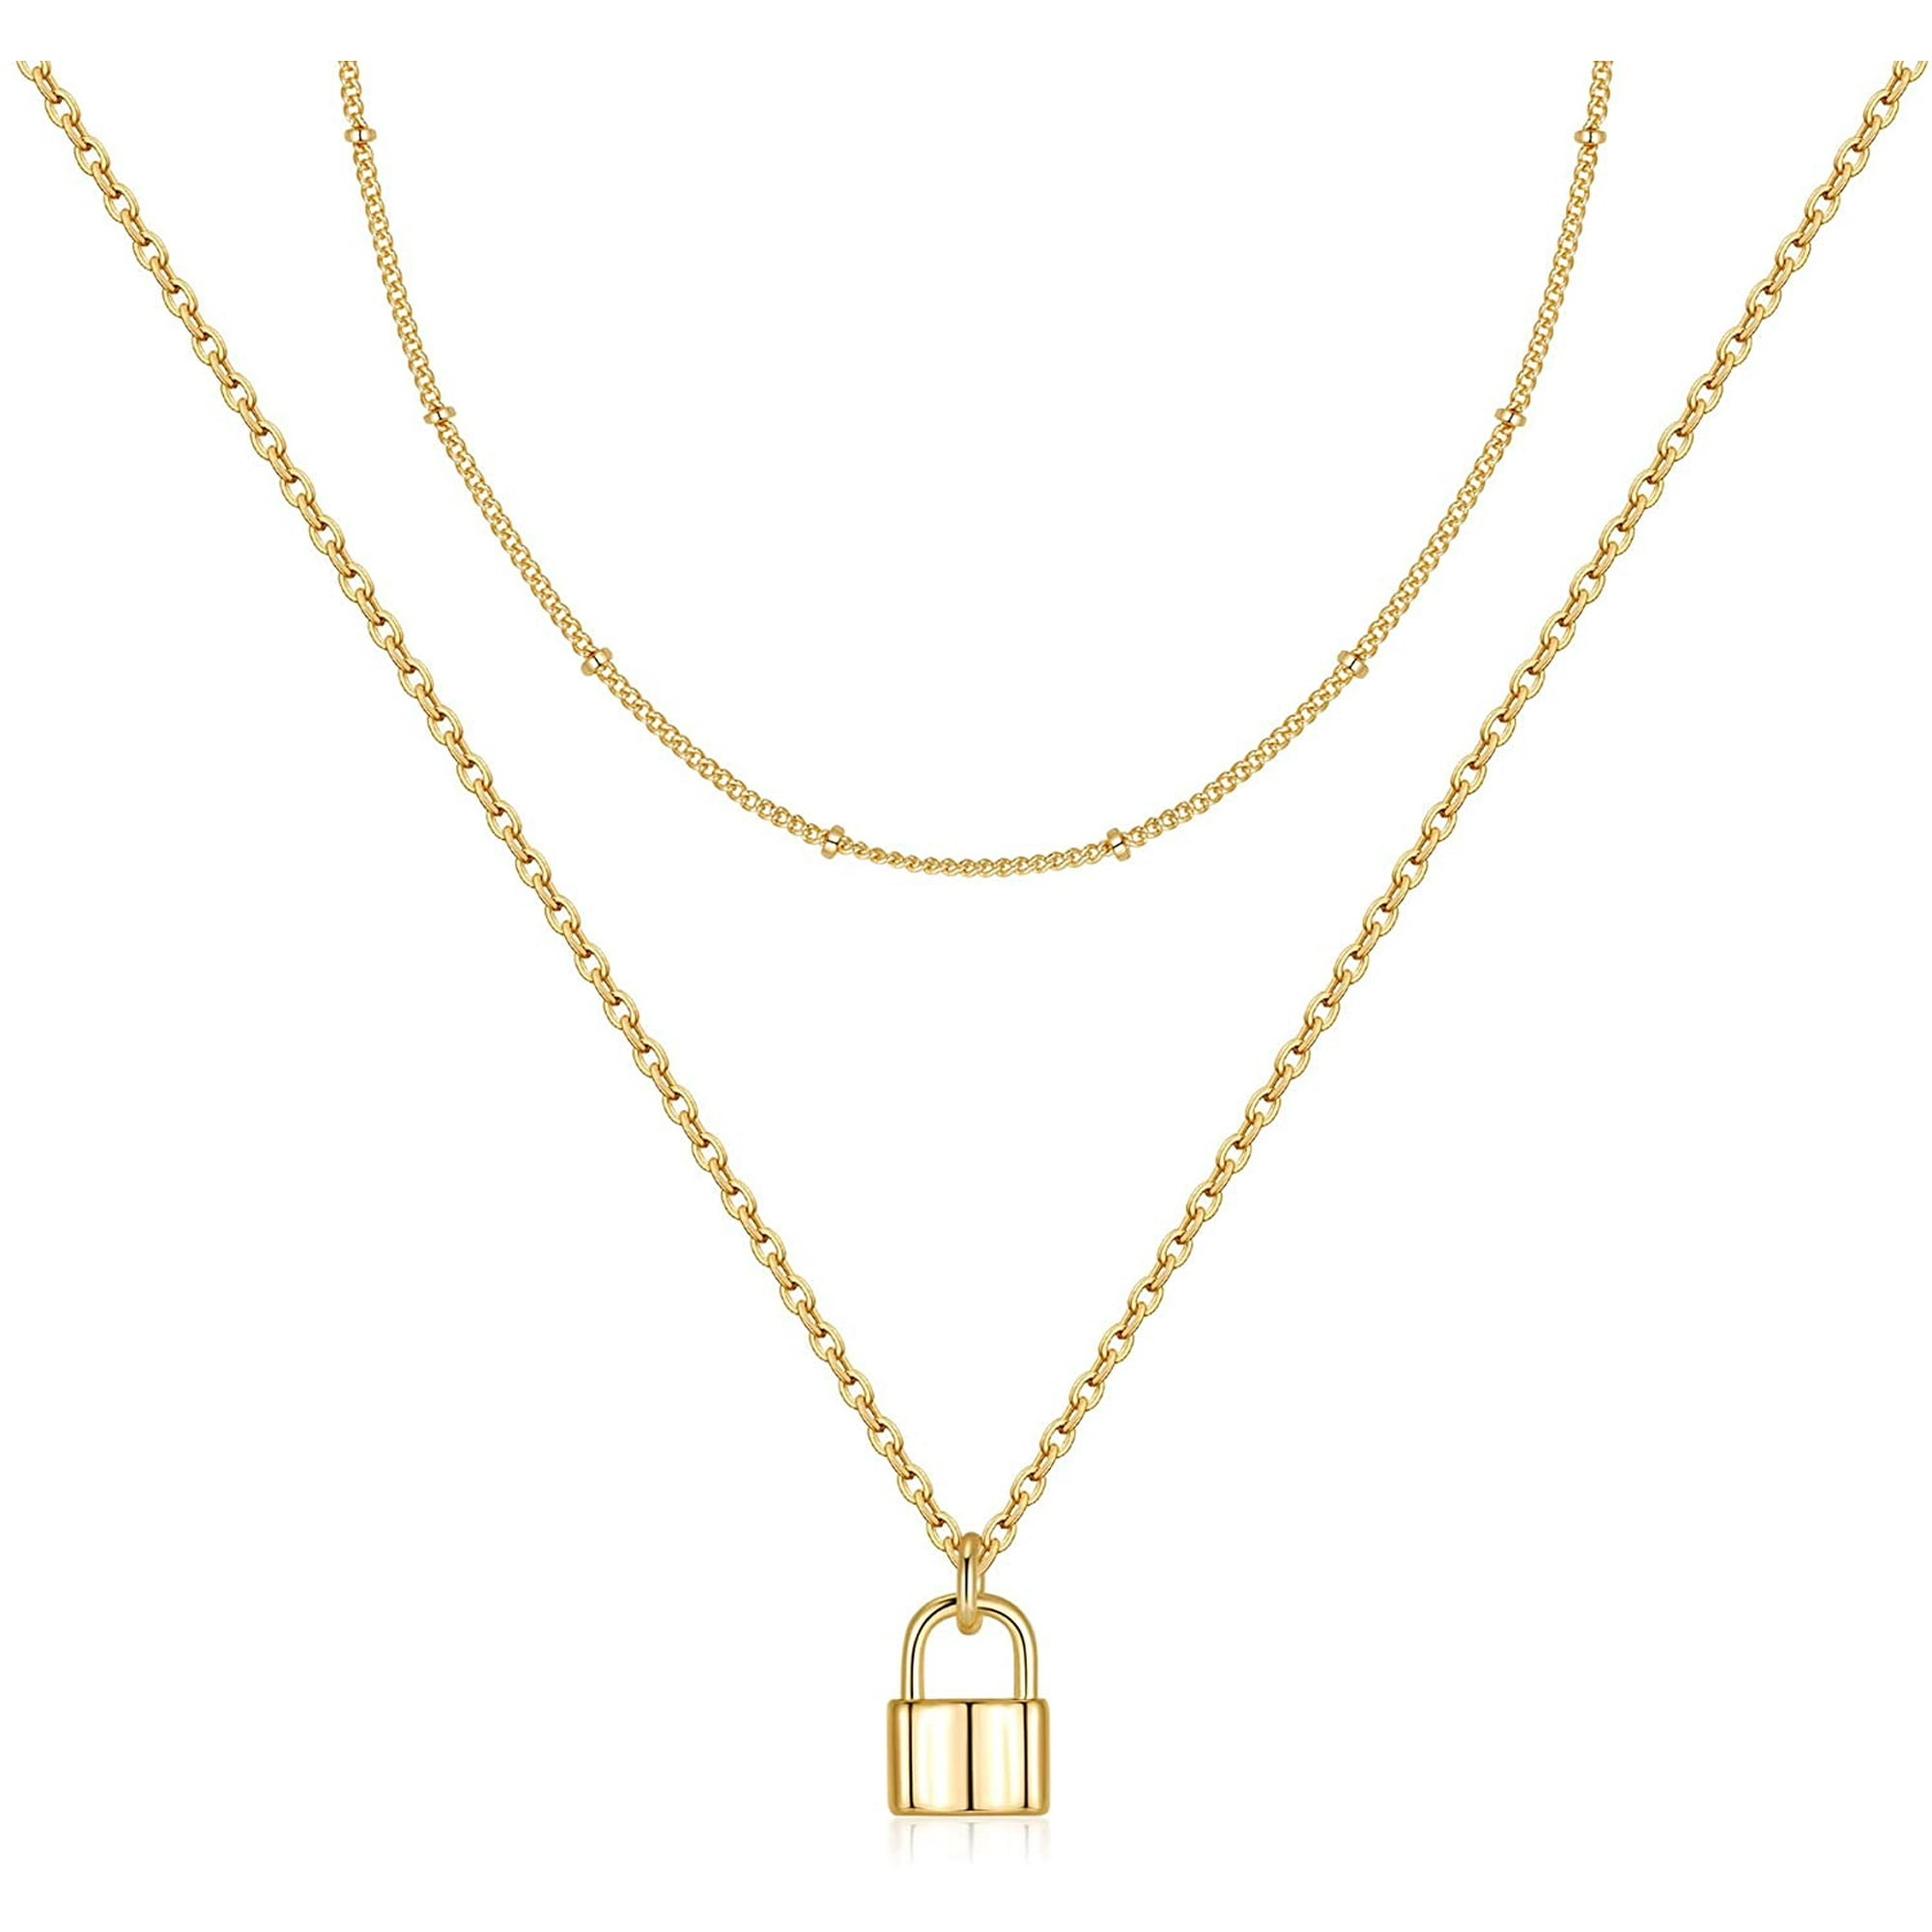 Lock Necklace for Women 14K Gold Filled Padlock Lock Pendant Chain Necklace  Girls Dainty Layered Lock and Key Choker Necklace Jewelry for Men 